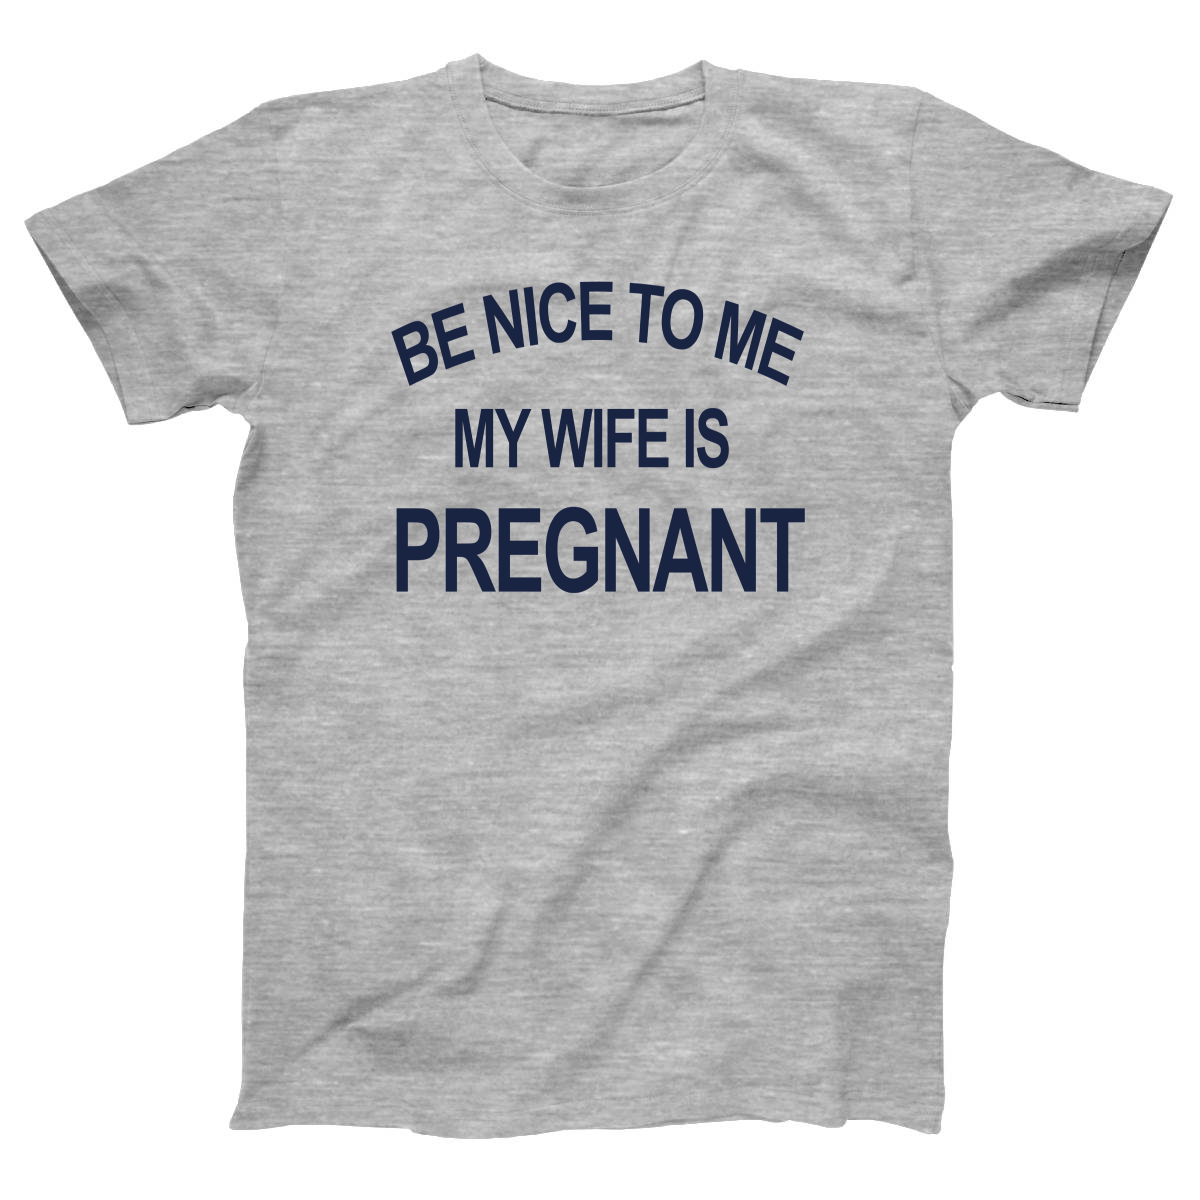 Be Nice To Me My Wife Is Pregnant Women's T-shirt | Gray